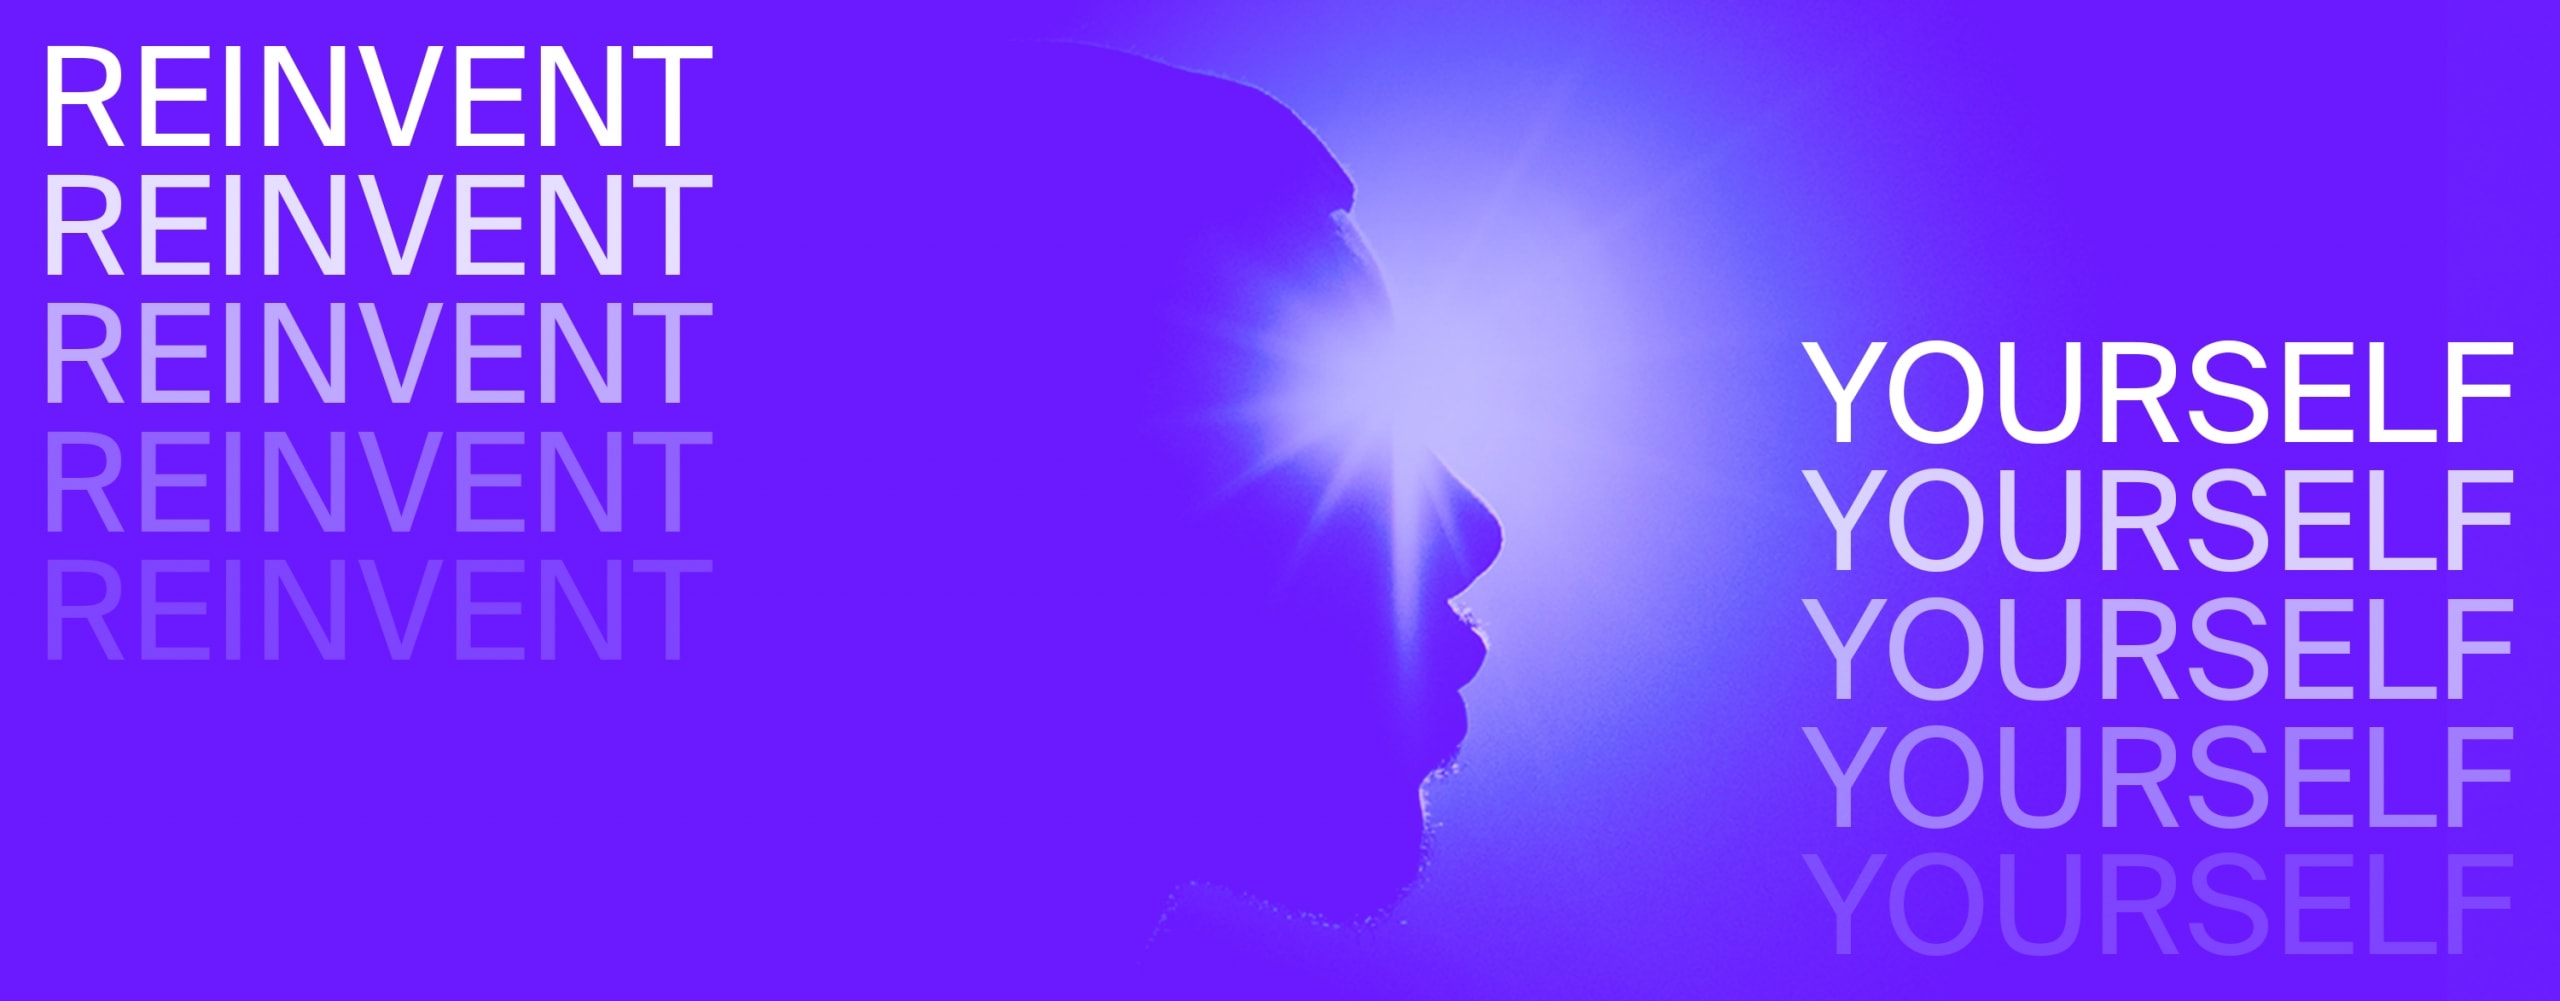 Purple silhouette of a face shaded by light